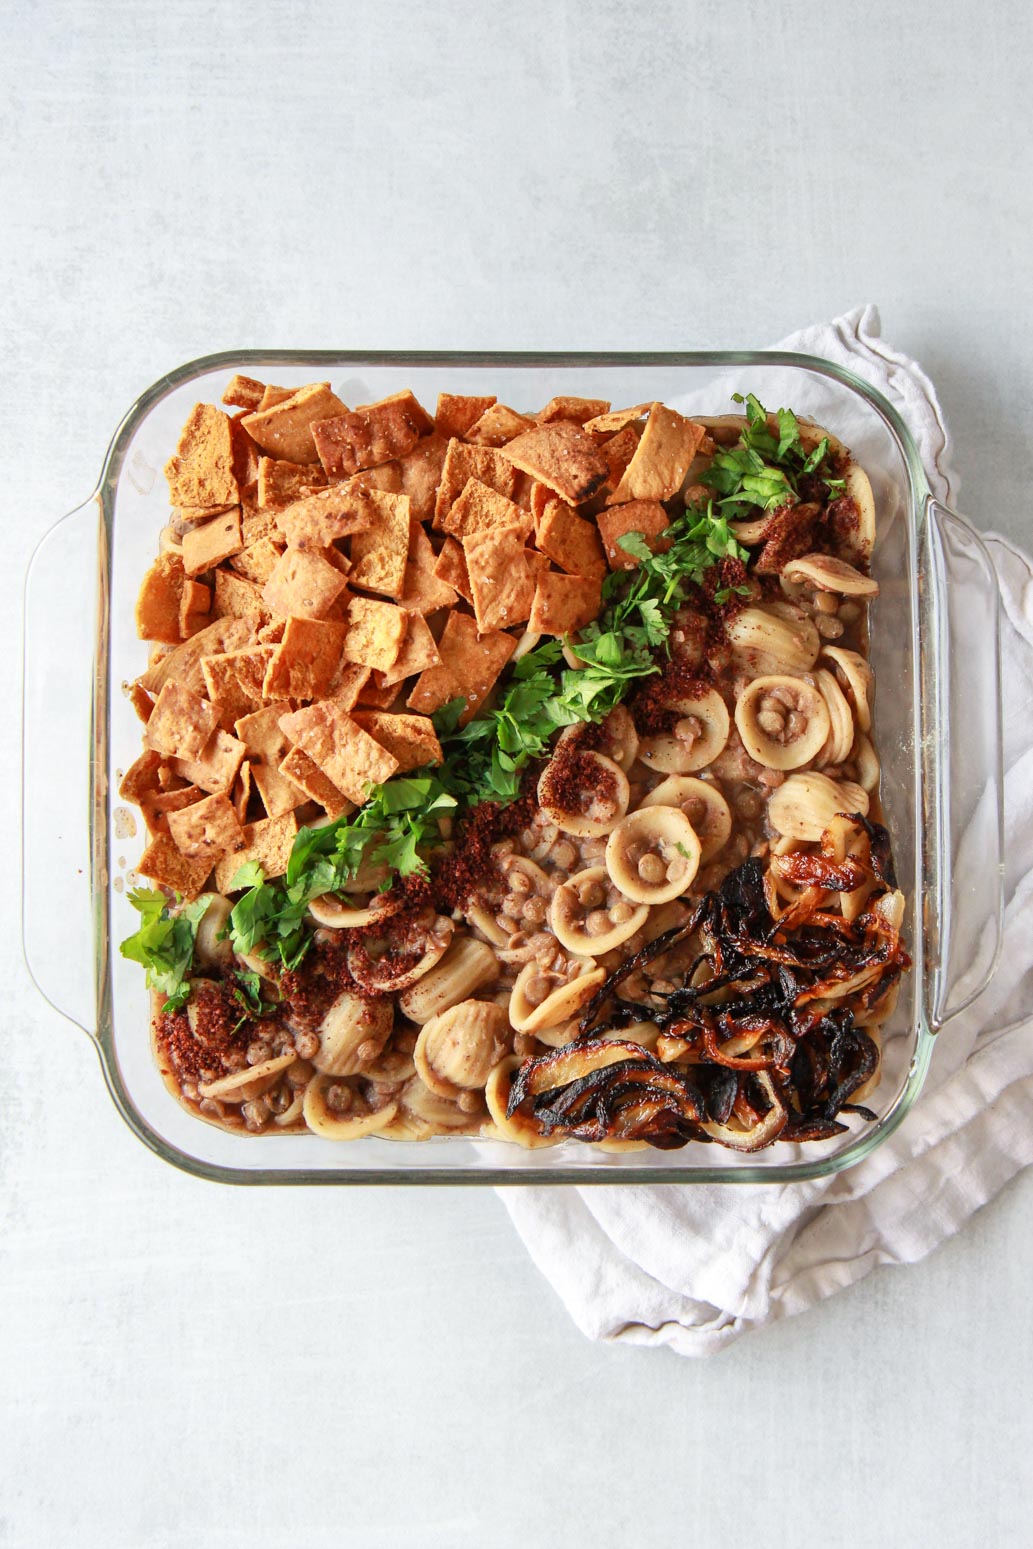 This Syrian pasta with lentils (horaa or horak osbao) is a great pantry friendly Middle Eastern comfort food. This vegan Mediterranean recipe is flavored with pomegranate molasses, sumac, and caramelized onions, and topped with crunchy pita chips.